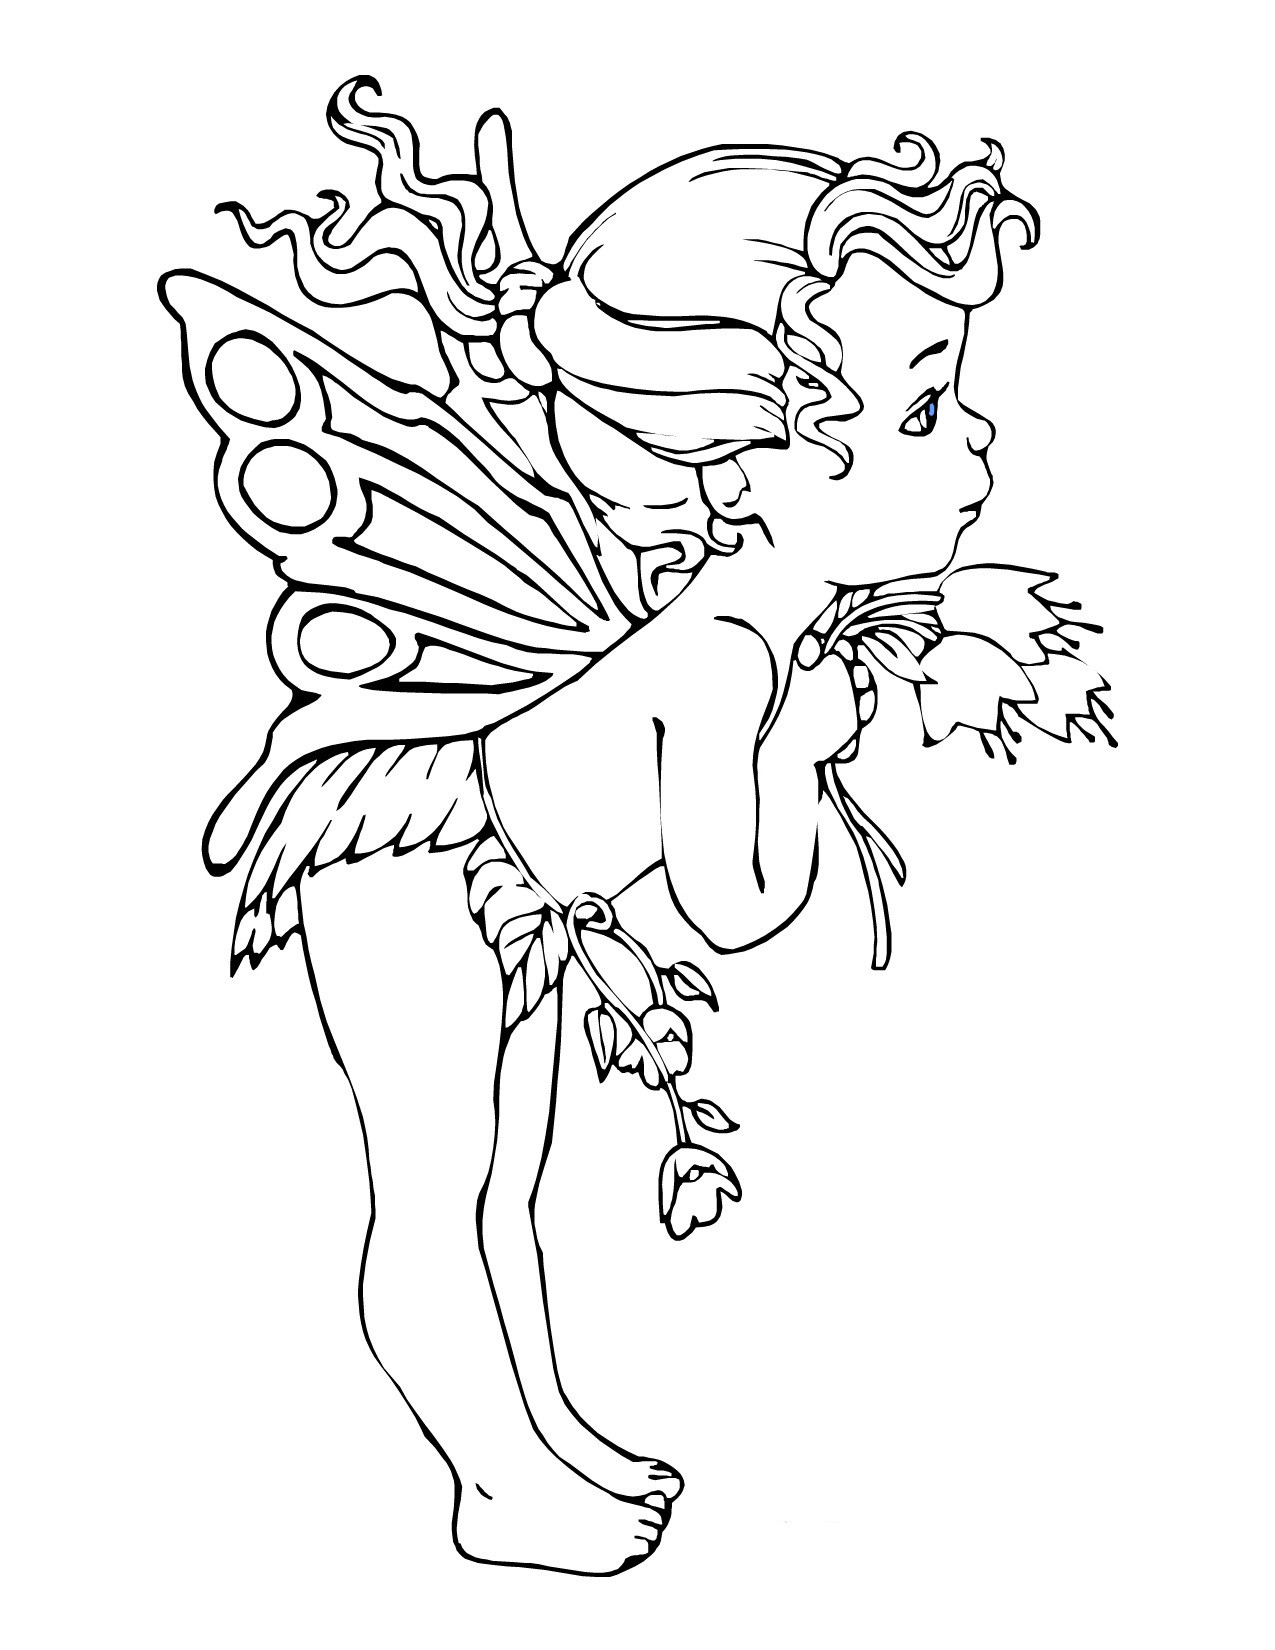 Fairies Coloring Pages For Adults
 Free Printable Fairy Coloring Pages For Kids